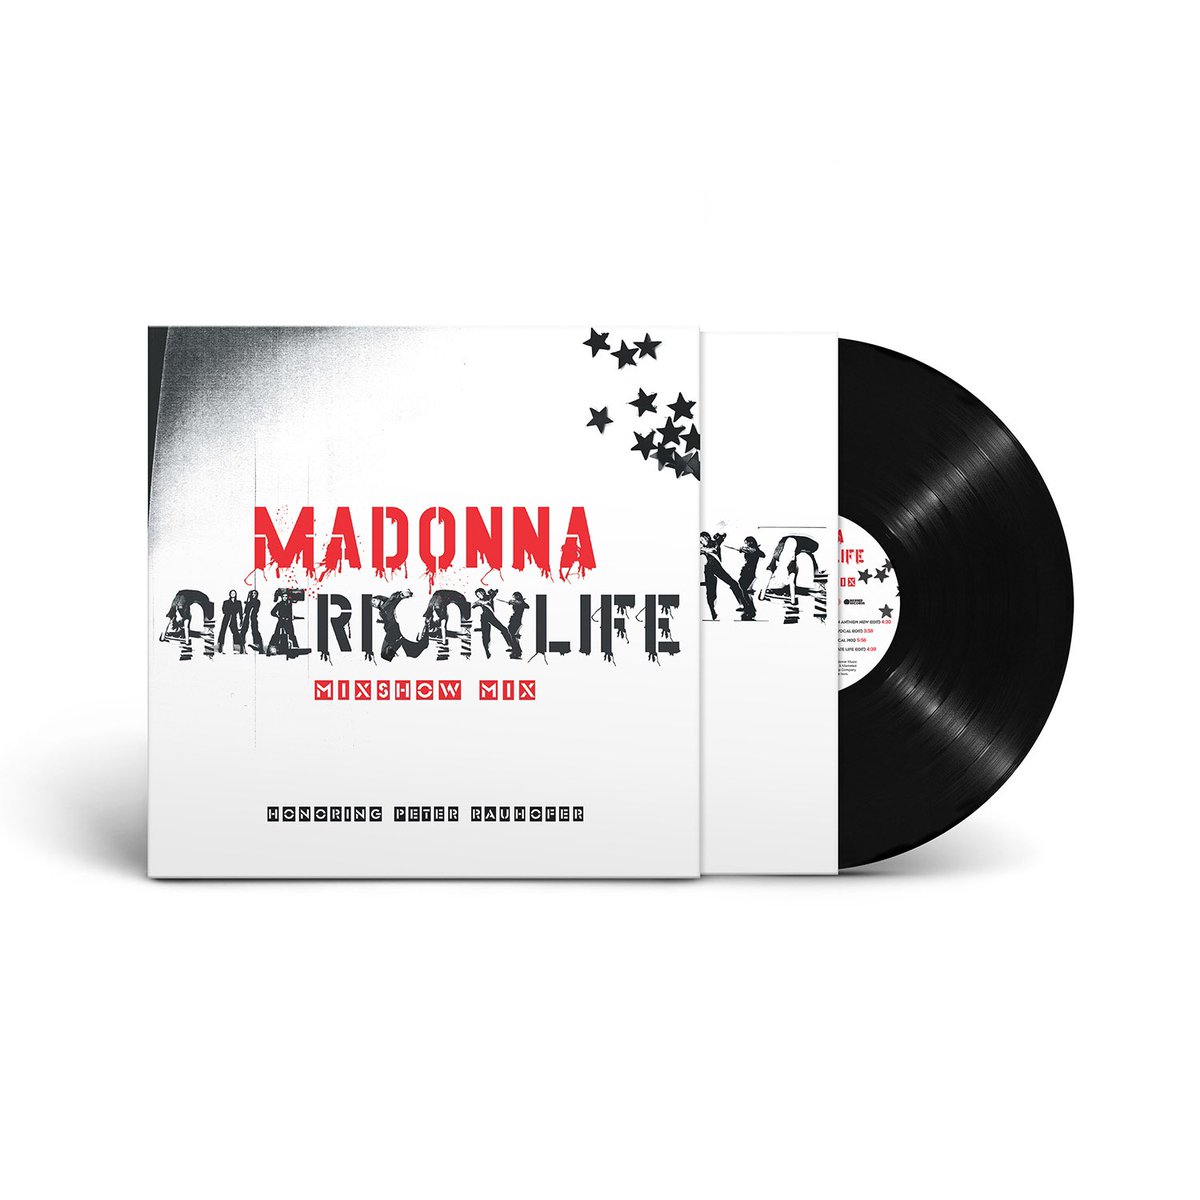 #RecordStoreDay 🚨! Madonna will this year release ‘American Life – Mixshow Mix’, an exclusive 8-tracks EP celebrating the album’s 20th anniversary and honoring the life and work of Peter Rauhofer!
Read the full story: bit.ly/MadonnaRSD2023
#RSD2023